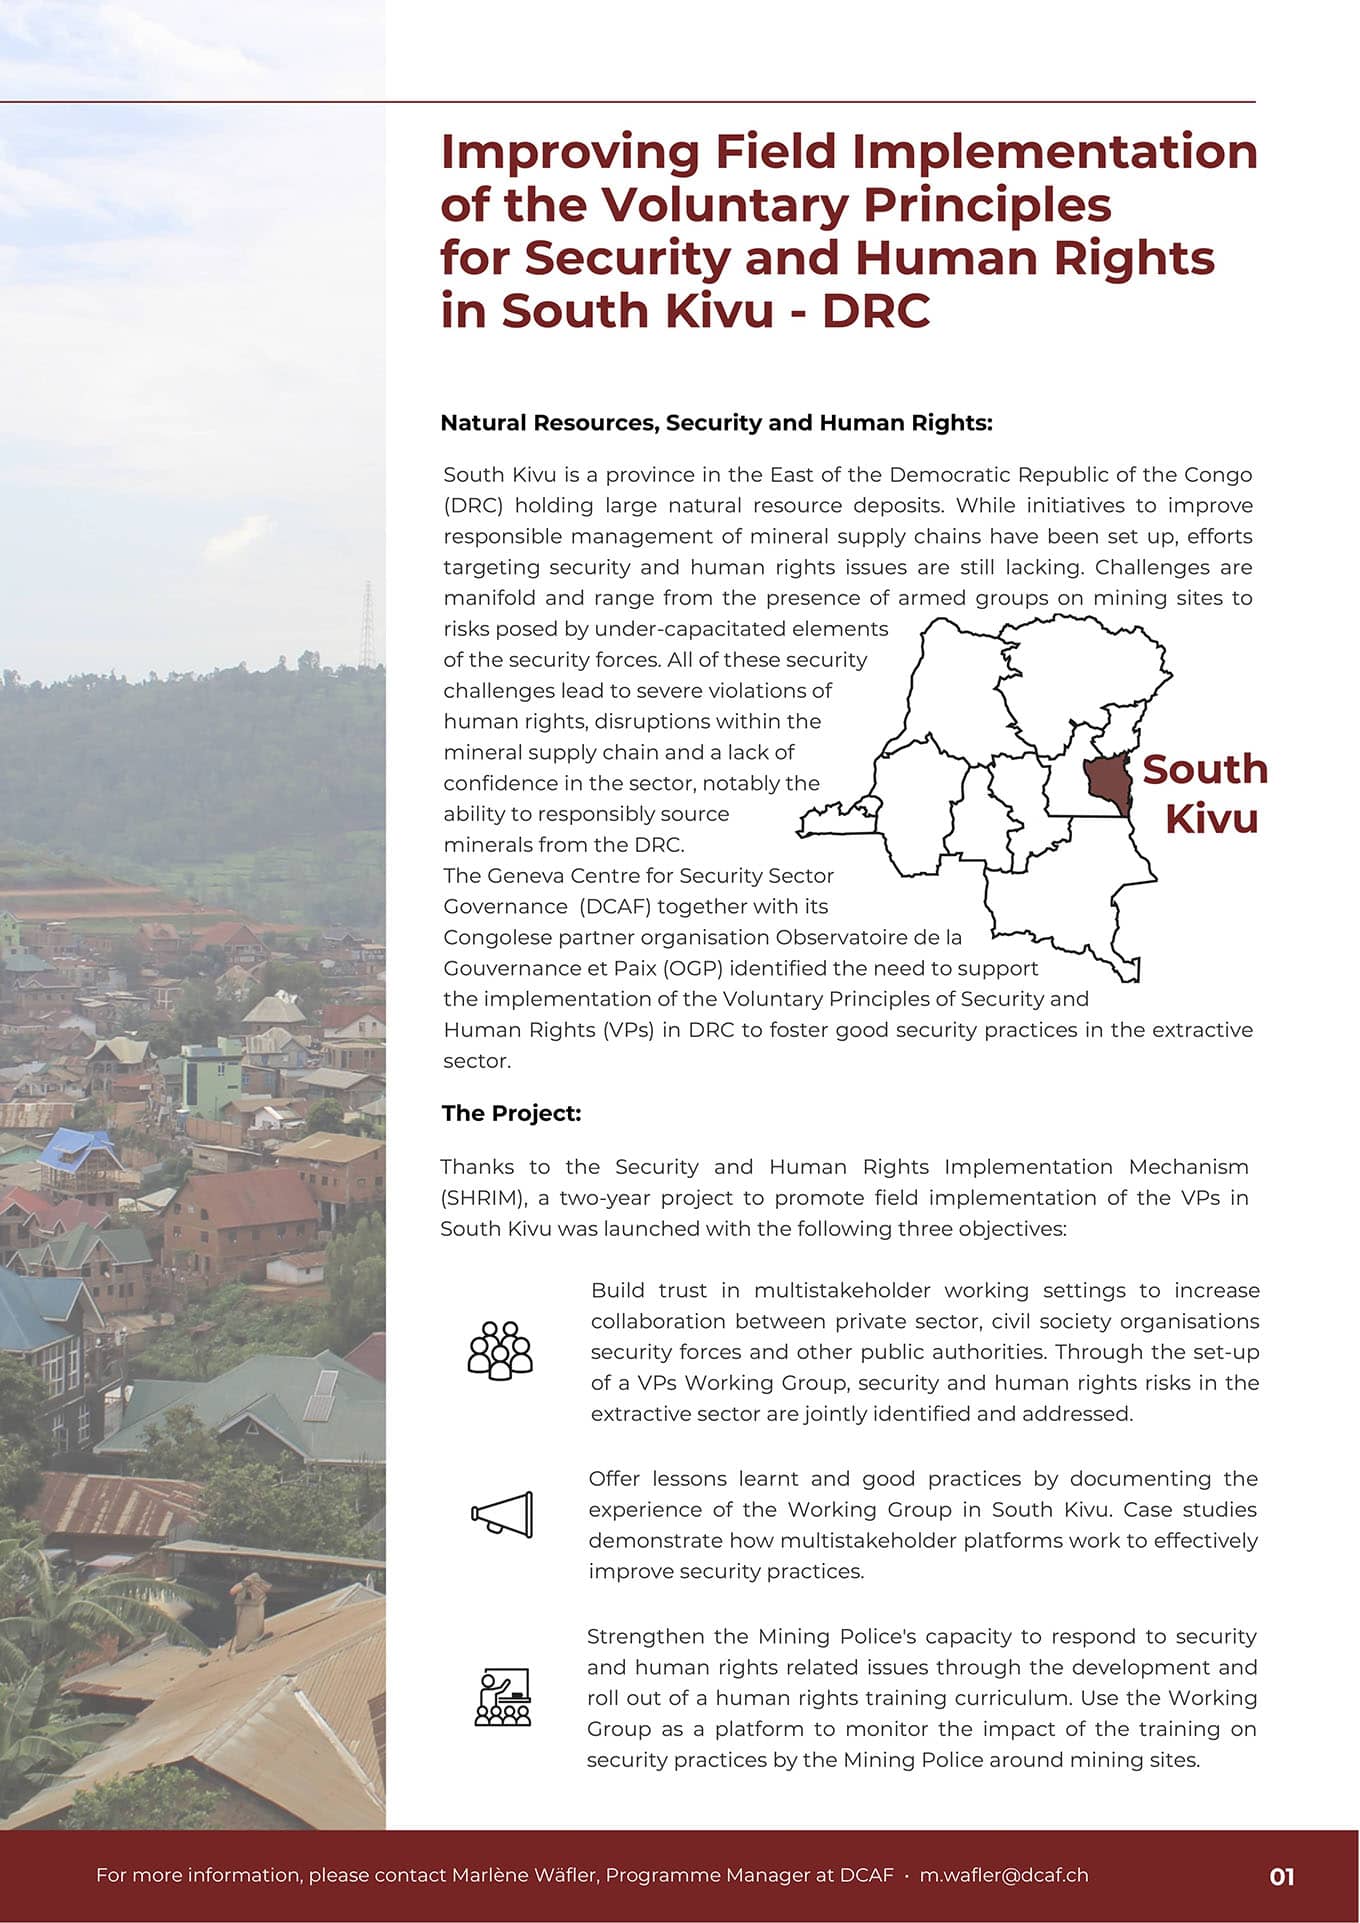 Improving Field Implementation of the Voluntary Principles for Security and Human Rights in South Kivu - DRC